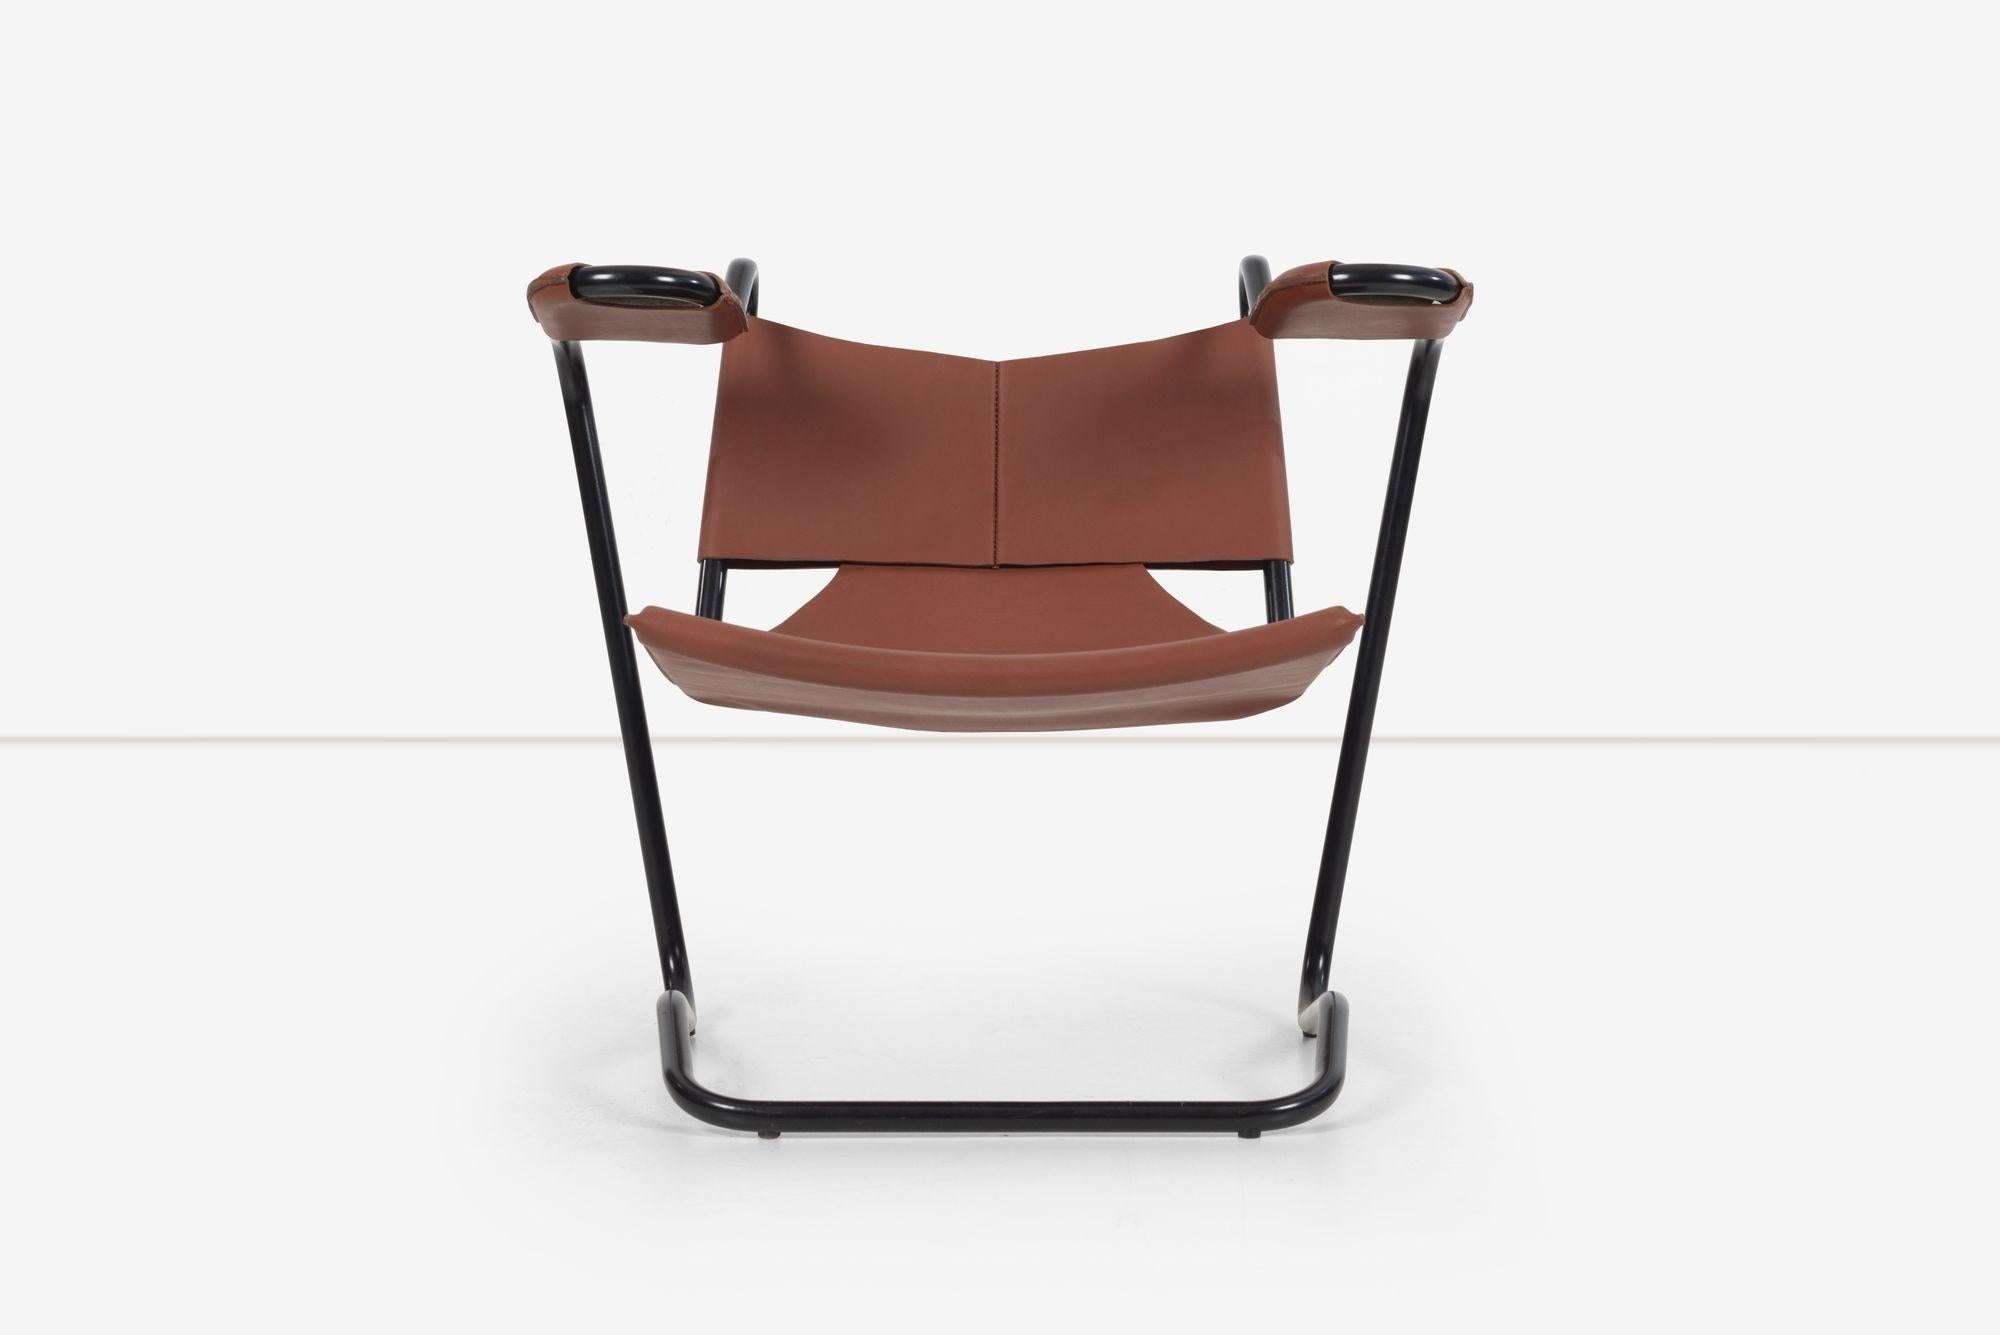 Dan Johnson leather sling chair, Tubular bent steel with leather sling, newer production from a rare series from the 1950's, exact period correct limited production 2002, Los Angeles California.